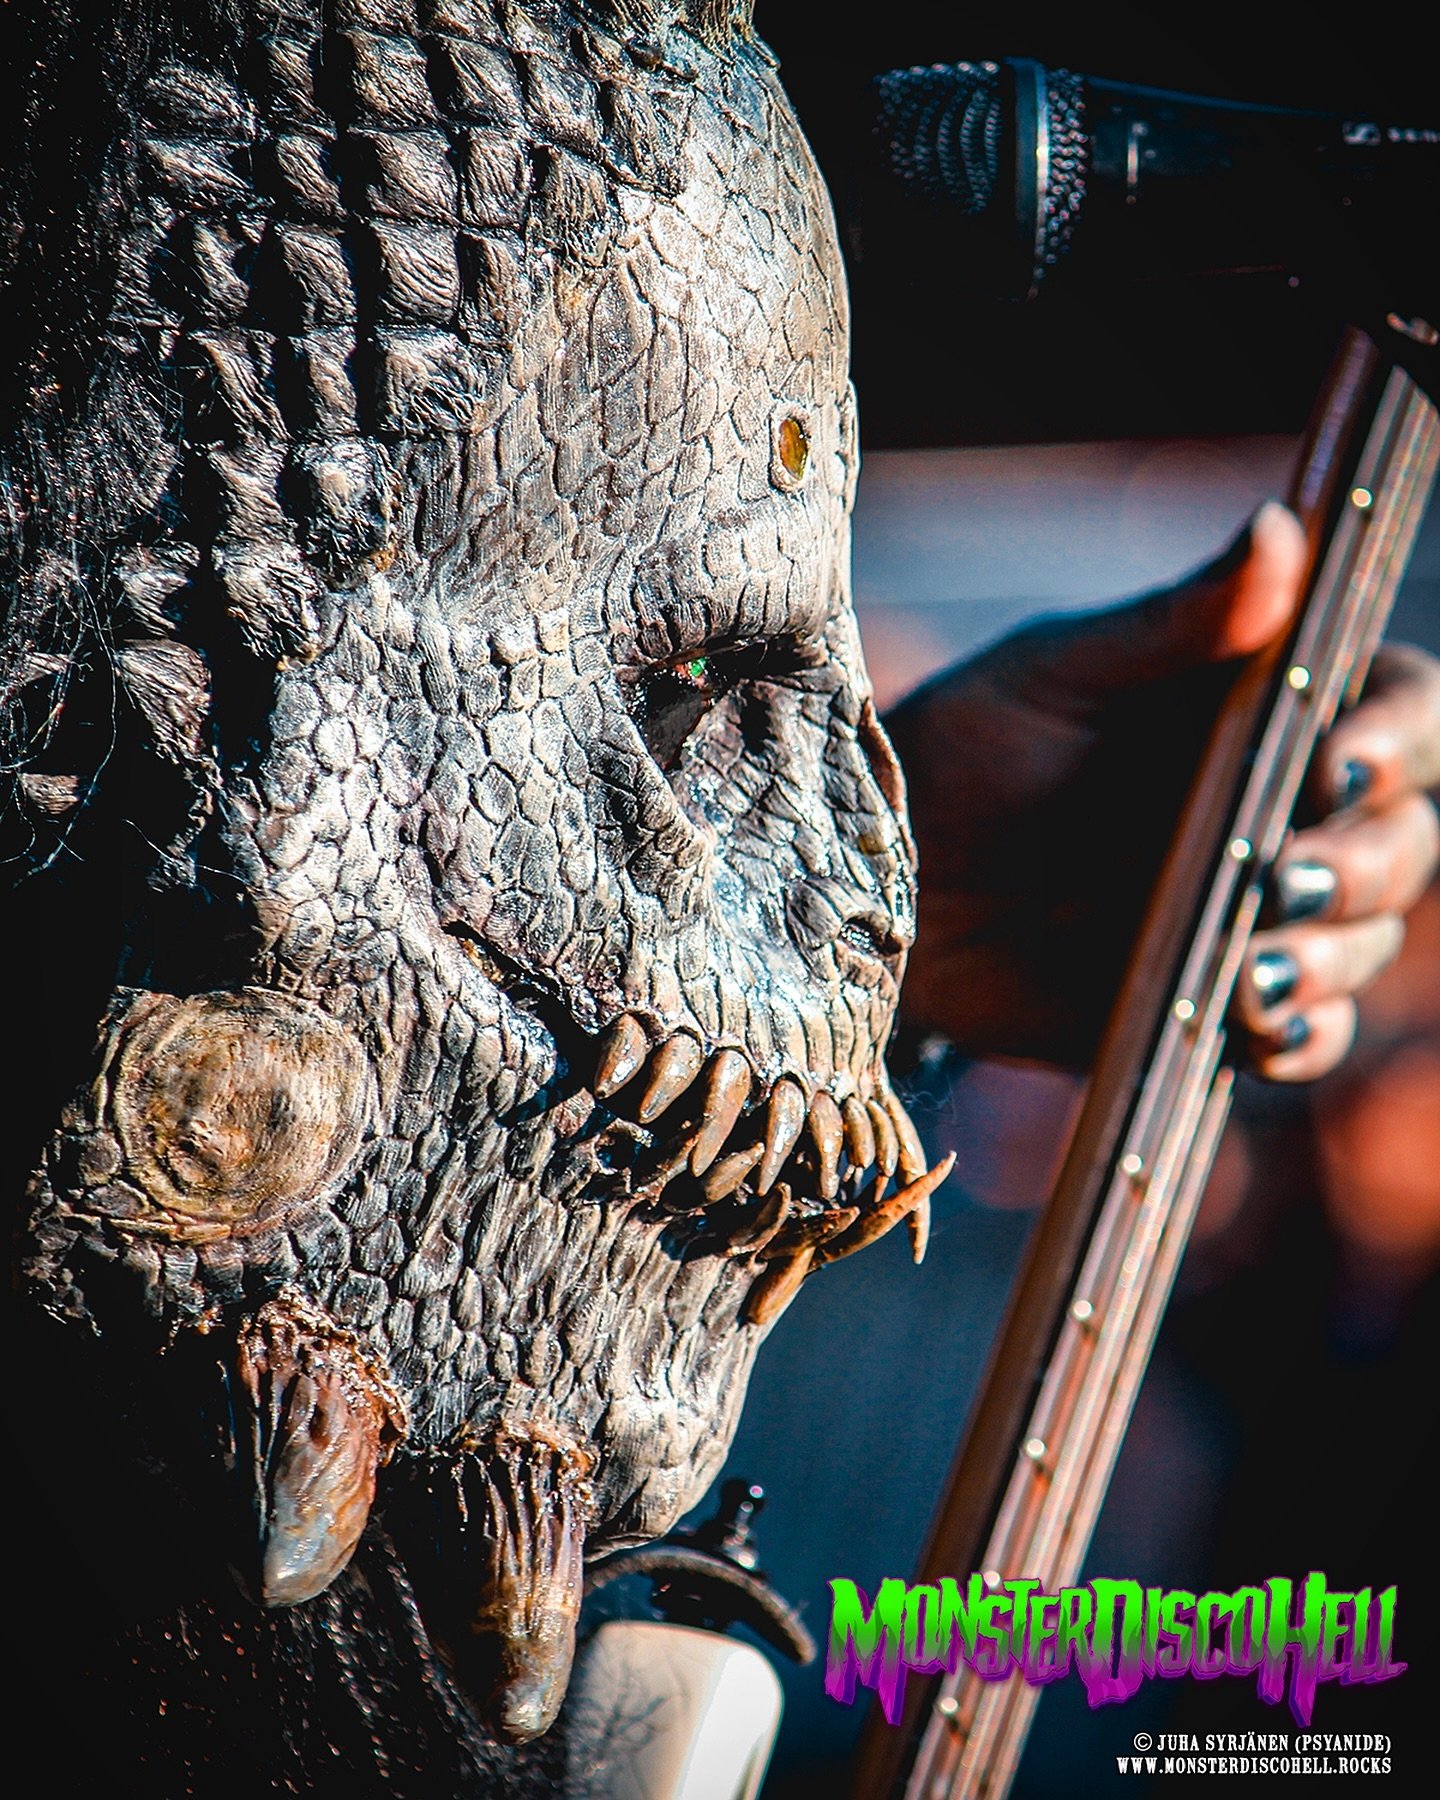 Well, suddenly it&rsquo;s Hiistai again! How nice is that!? For today&rsquo;s lizard lovin&rsquo; post, let&rsquo;s enjoy this previously unused, extreme close-up shot of the Reptroll from a rare angle I managed to snap from the side of the stage at 